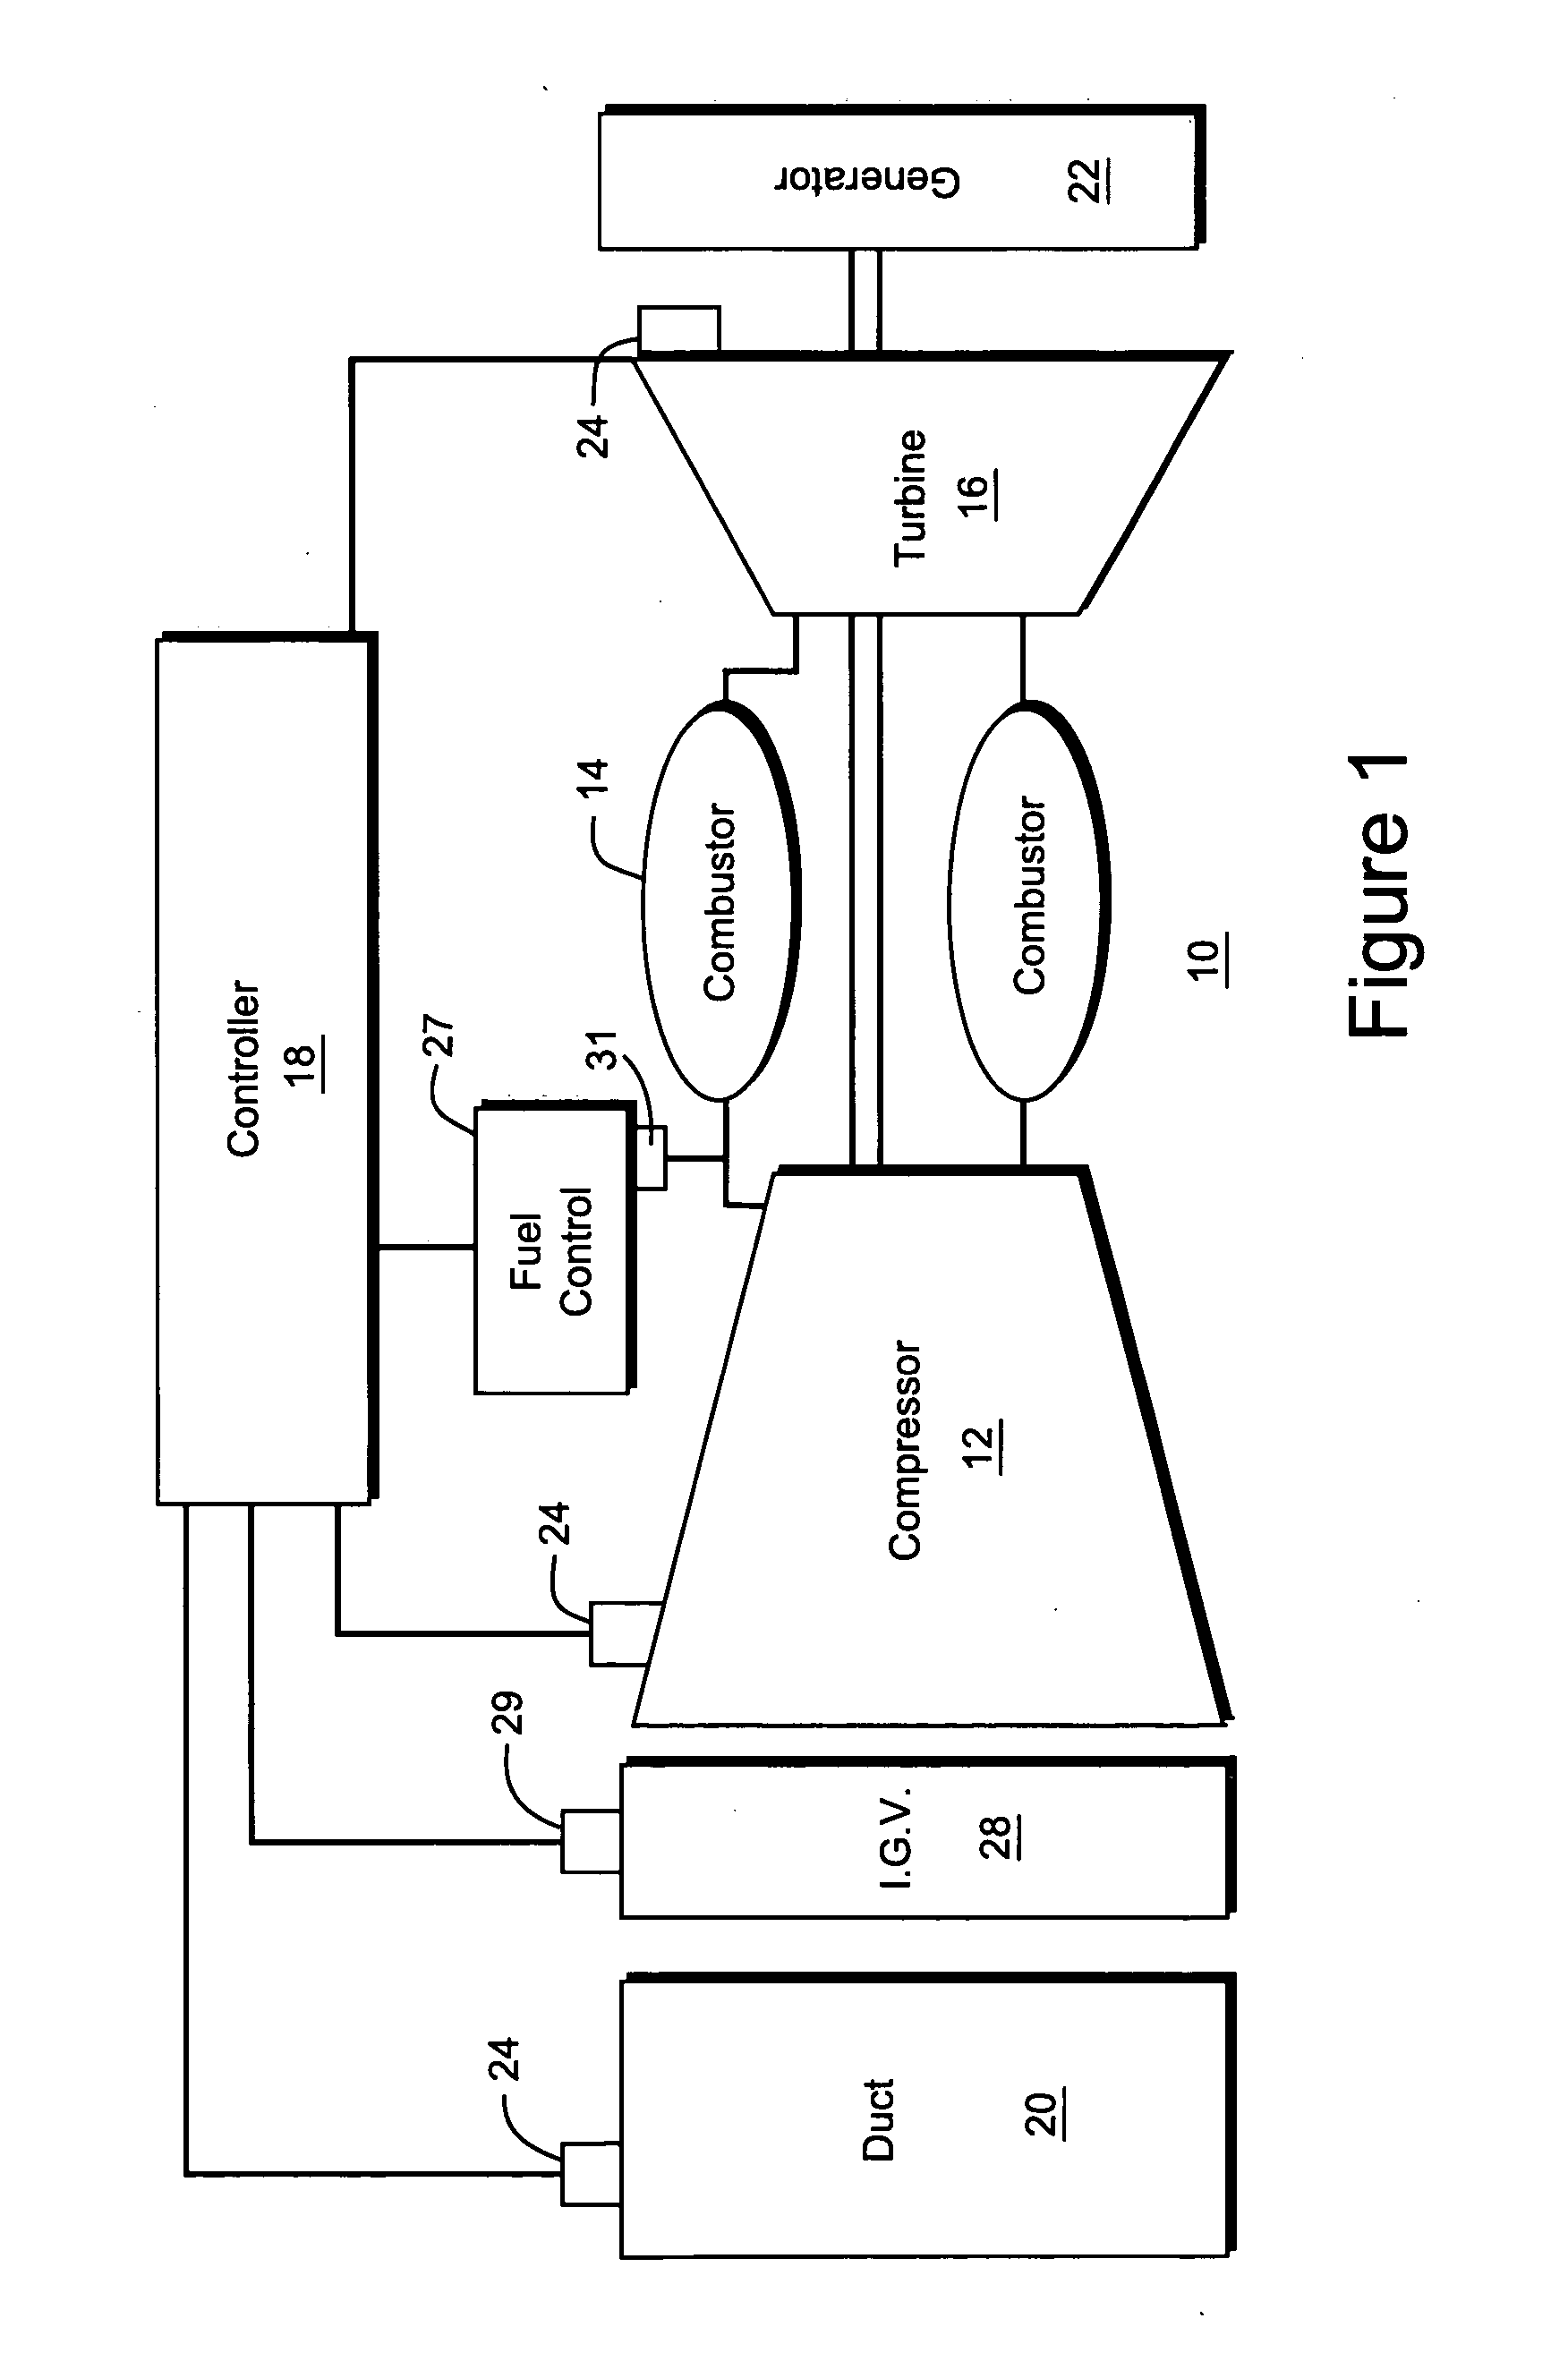 Method and system for incorporating an emission sensor into a gas turbine controller